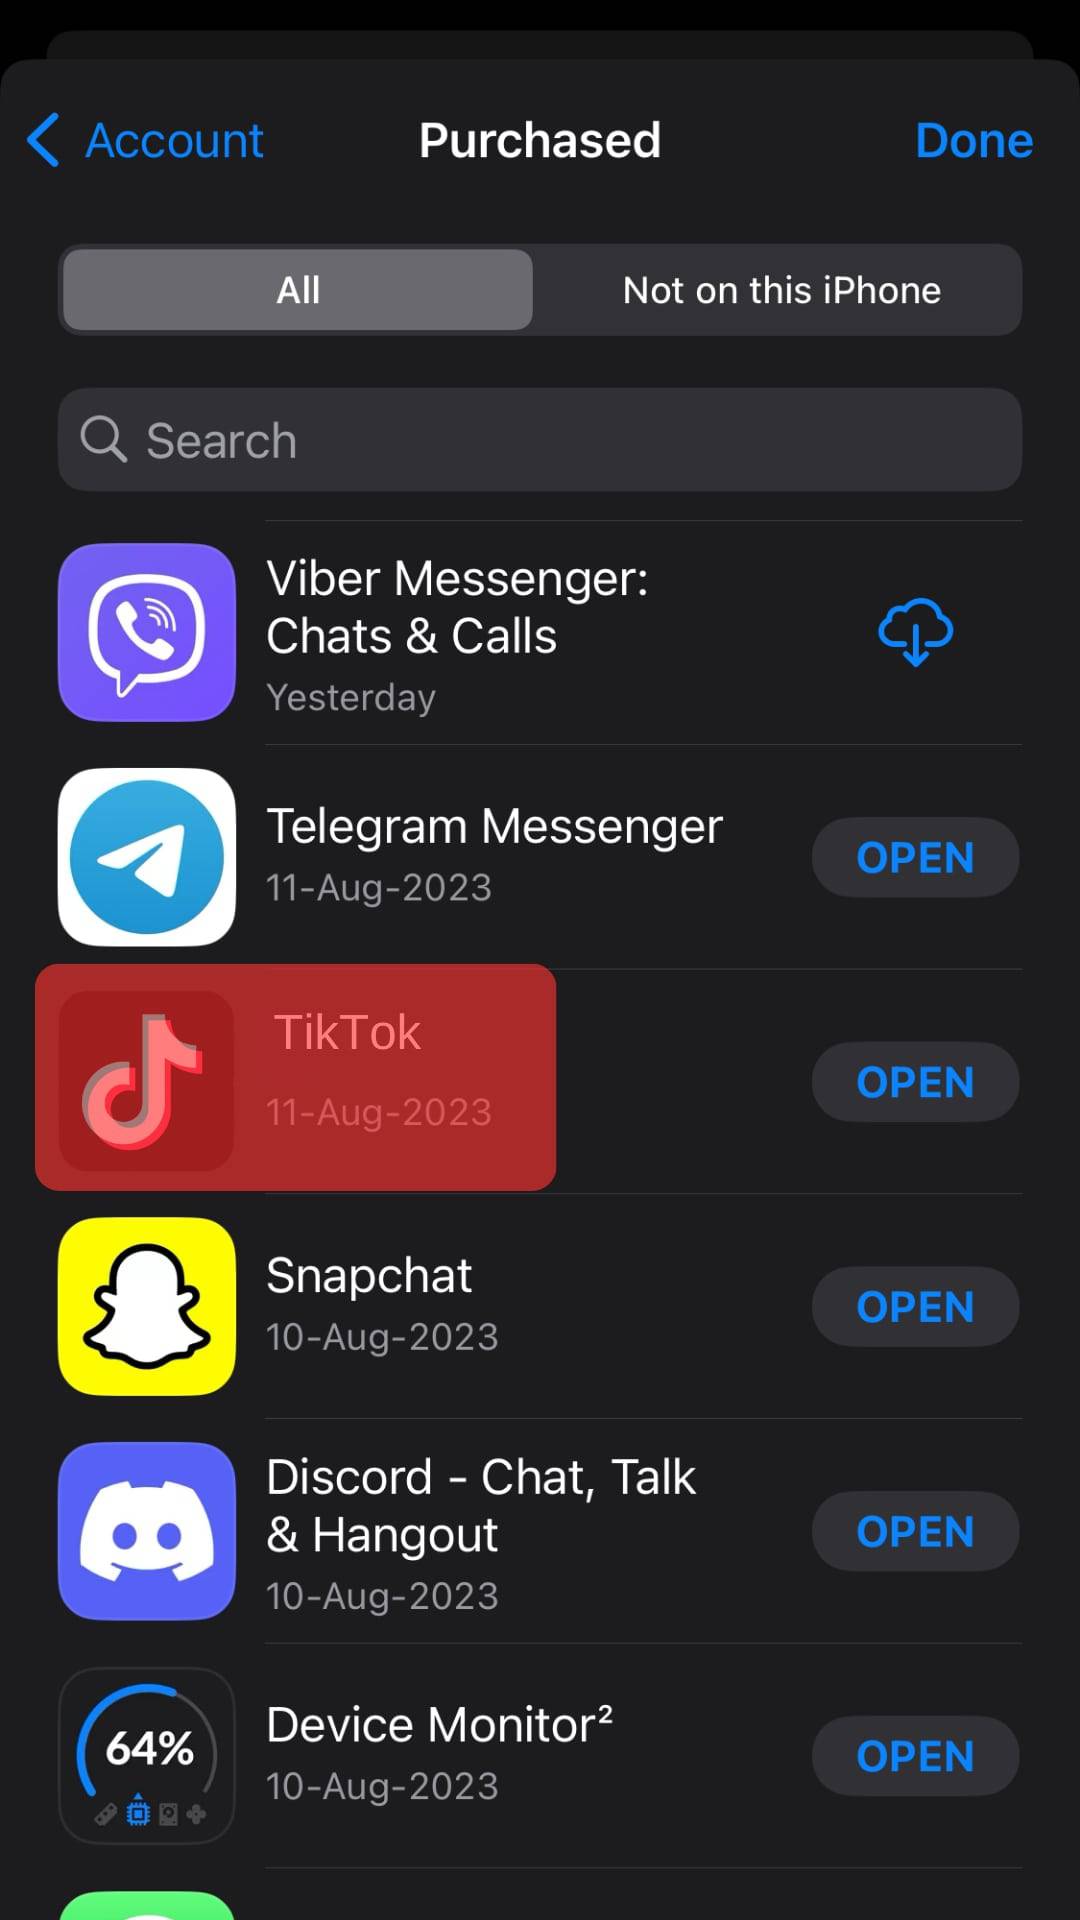 Date Next To Tiktok App Is The Date You Installed It.